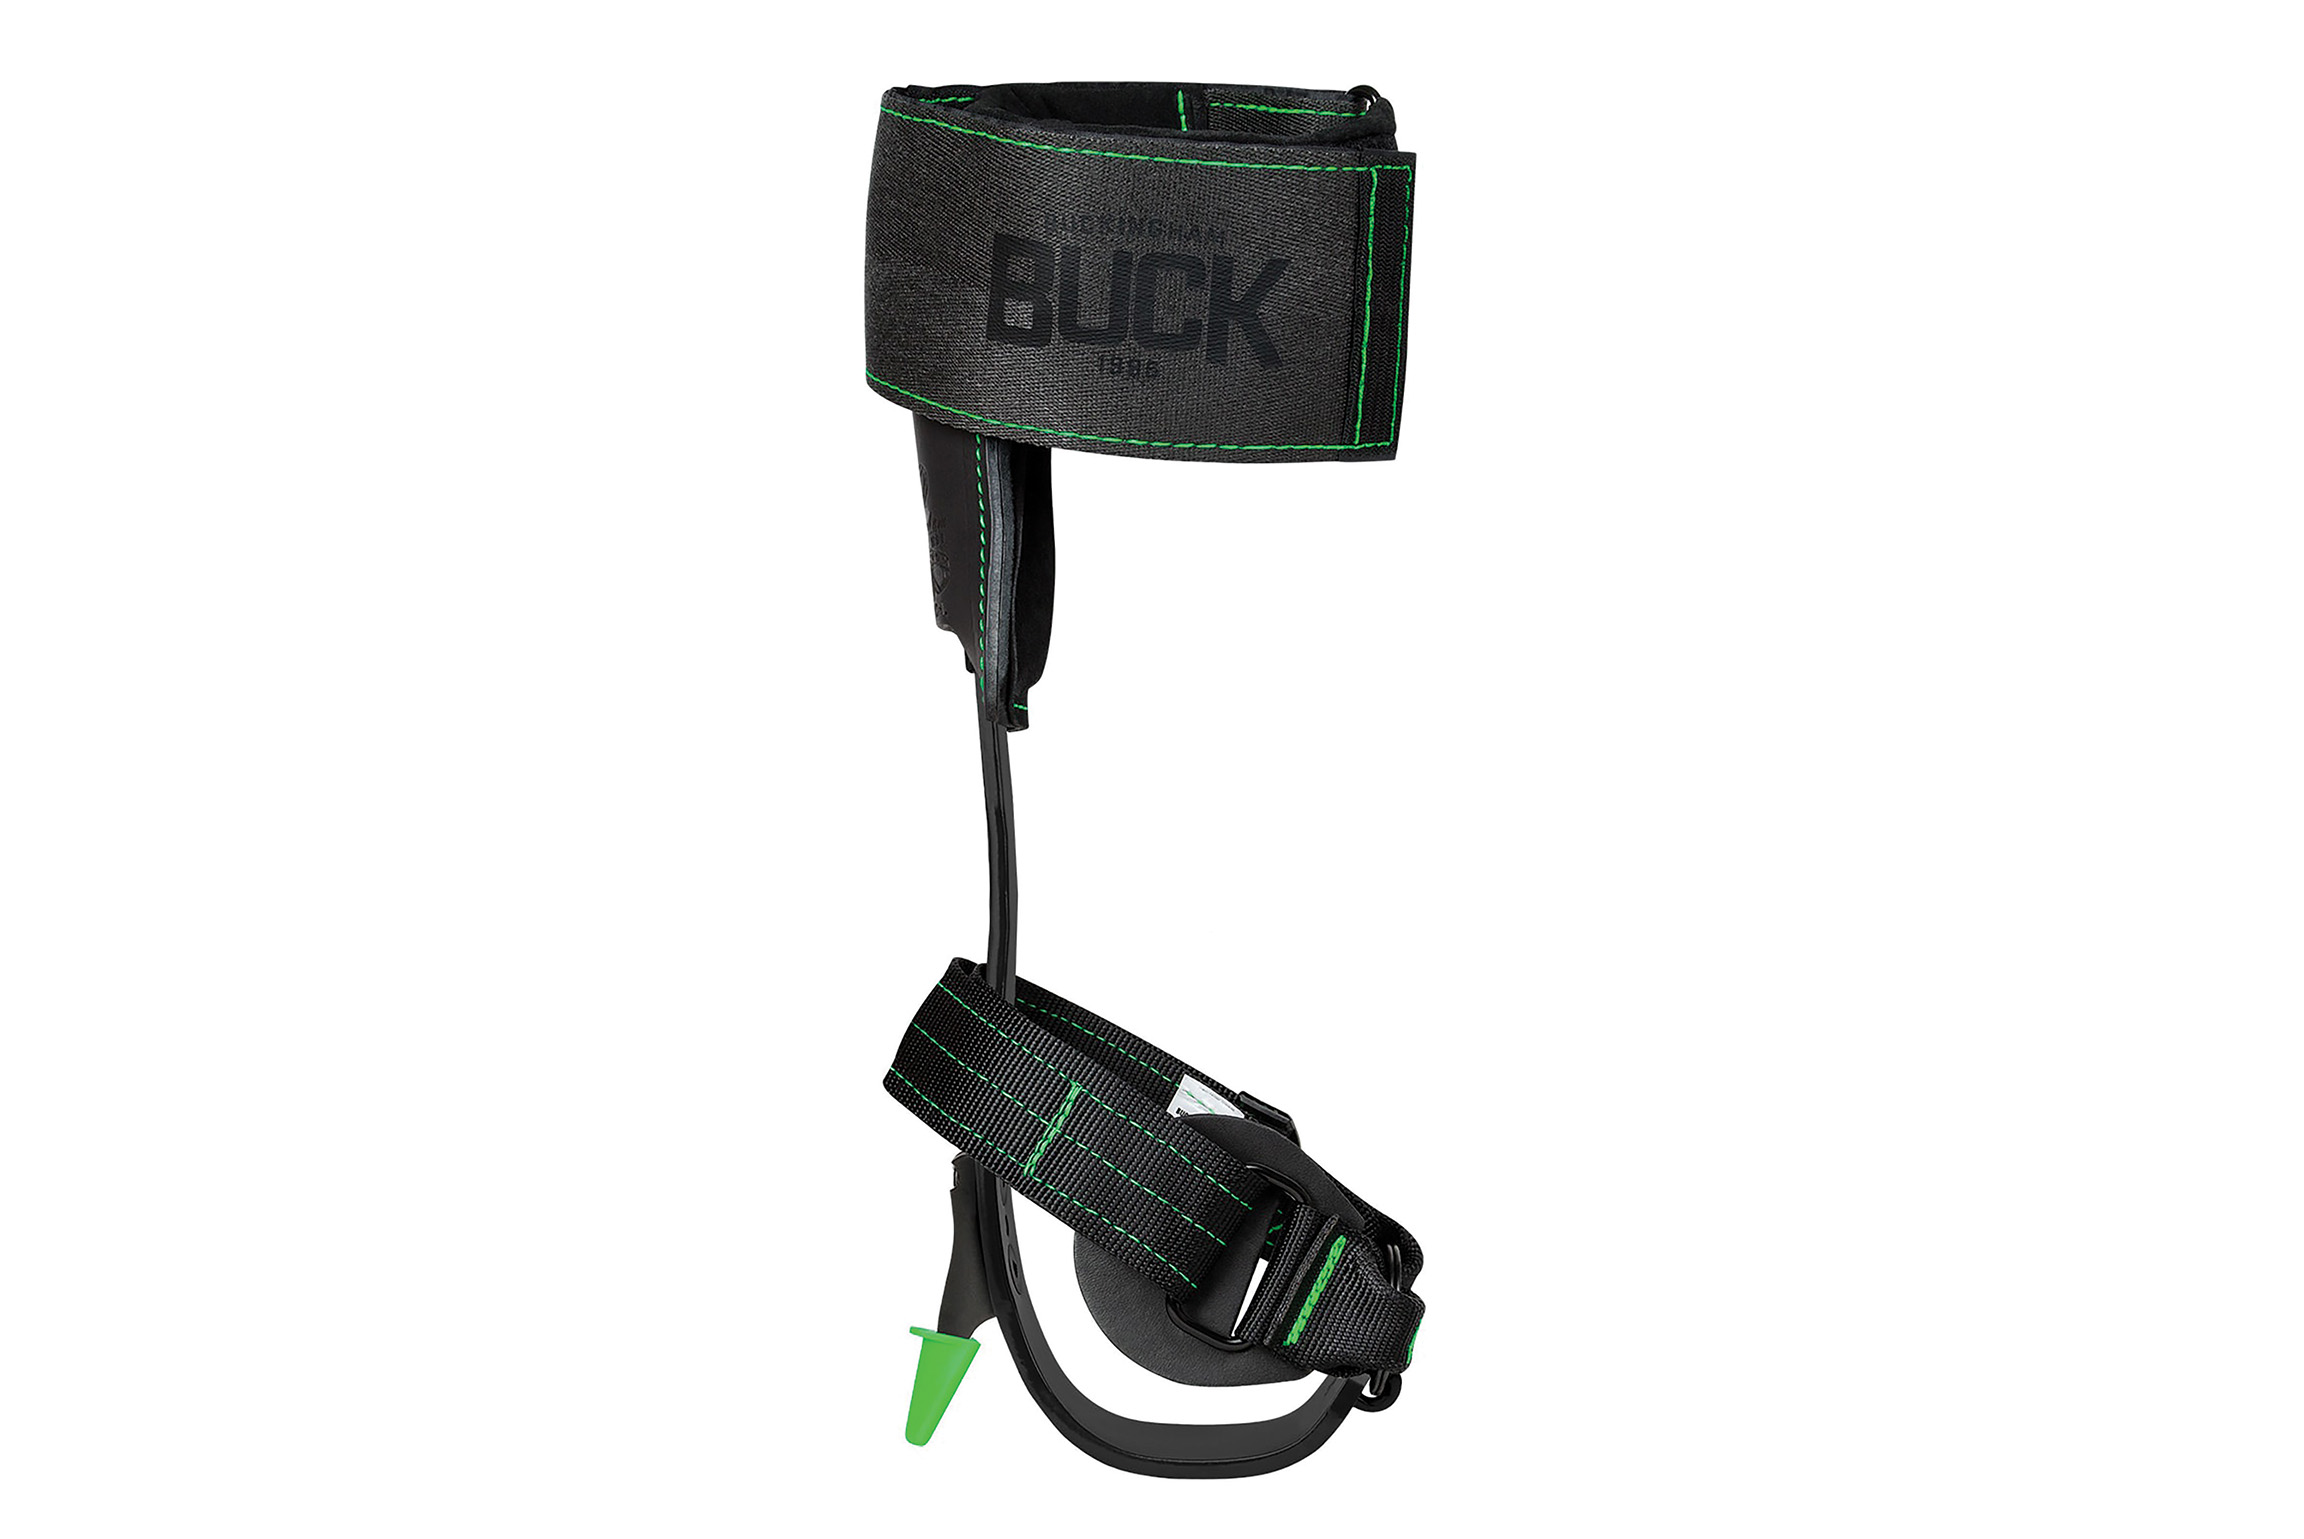 Black climbing stirrup and wrap pad with green accents. Image by Buckingham Manufacturing.